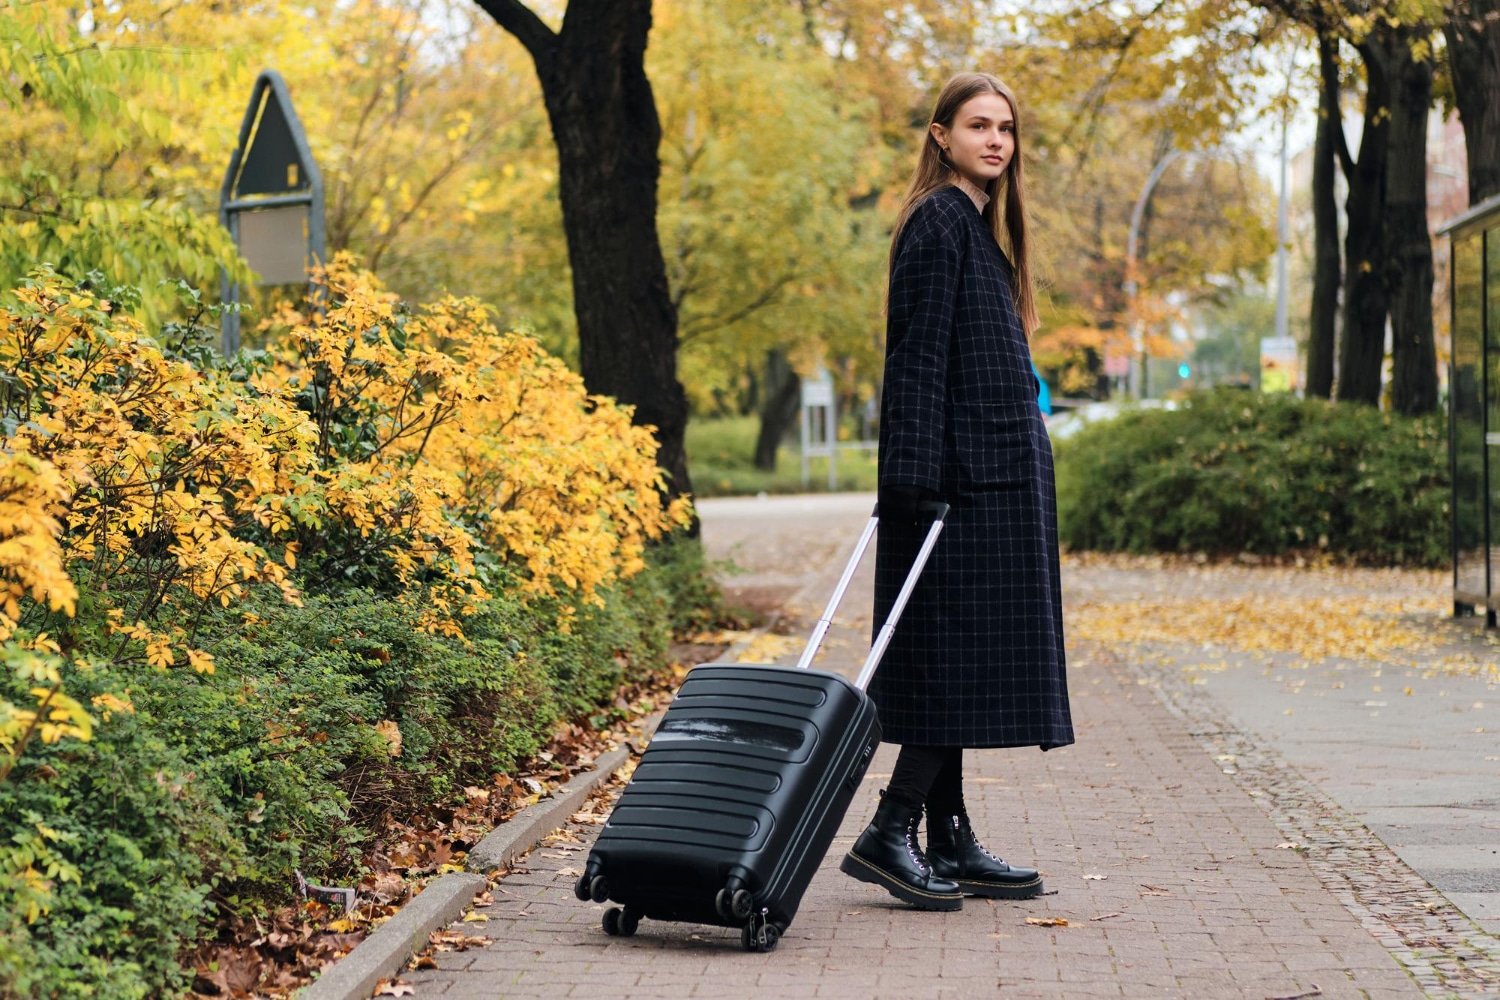 Travel In Style With DELSEY Paris’s Durable And Elegant Luggage